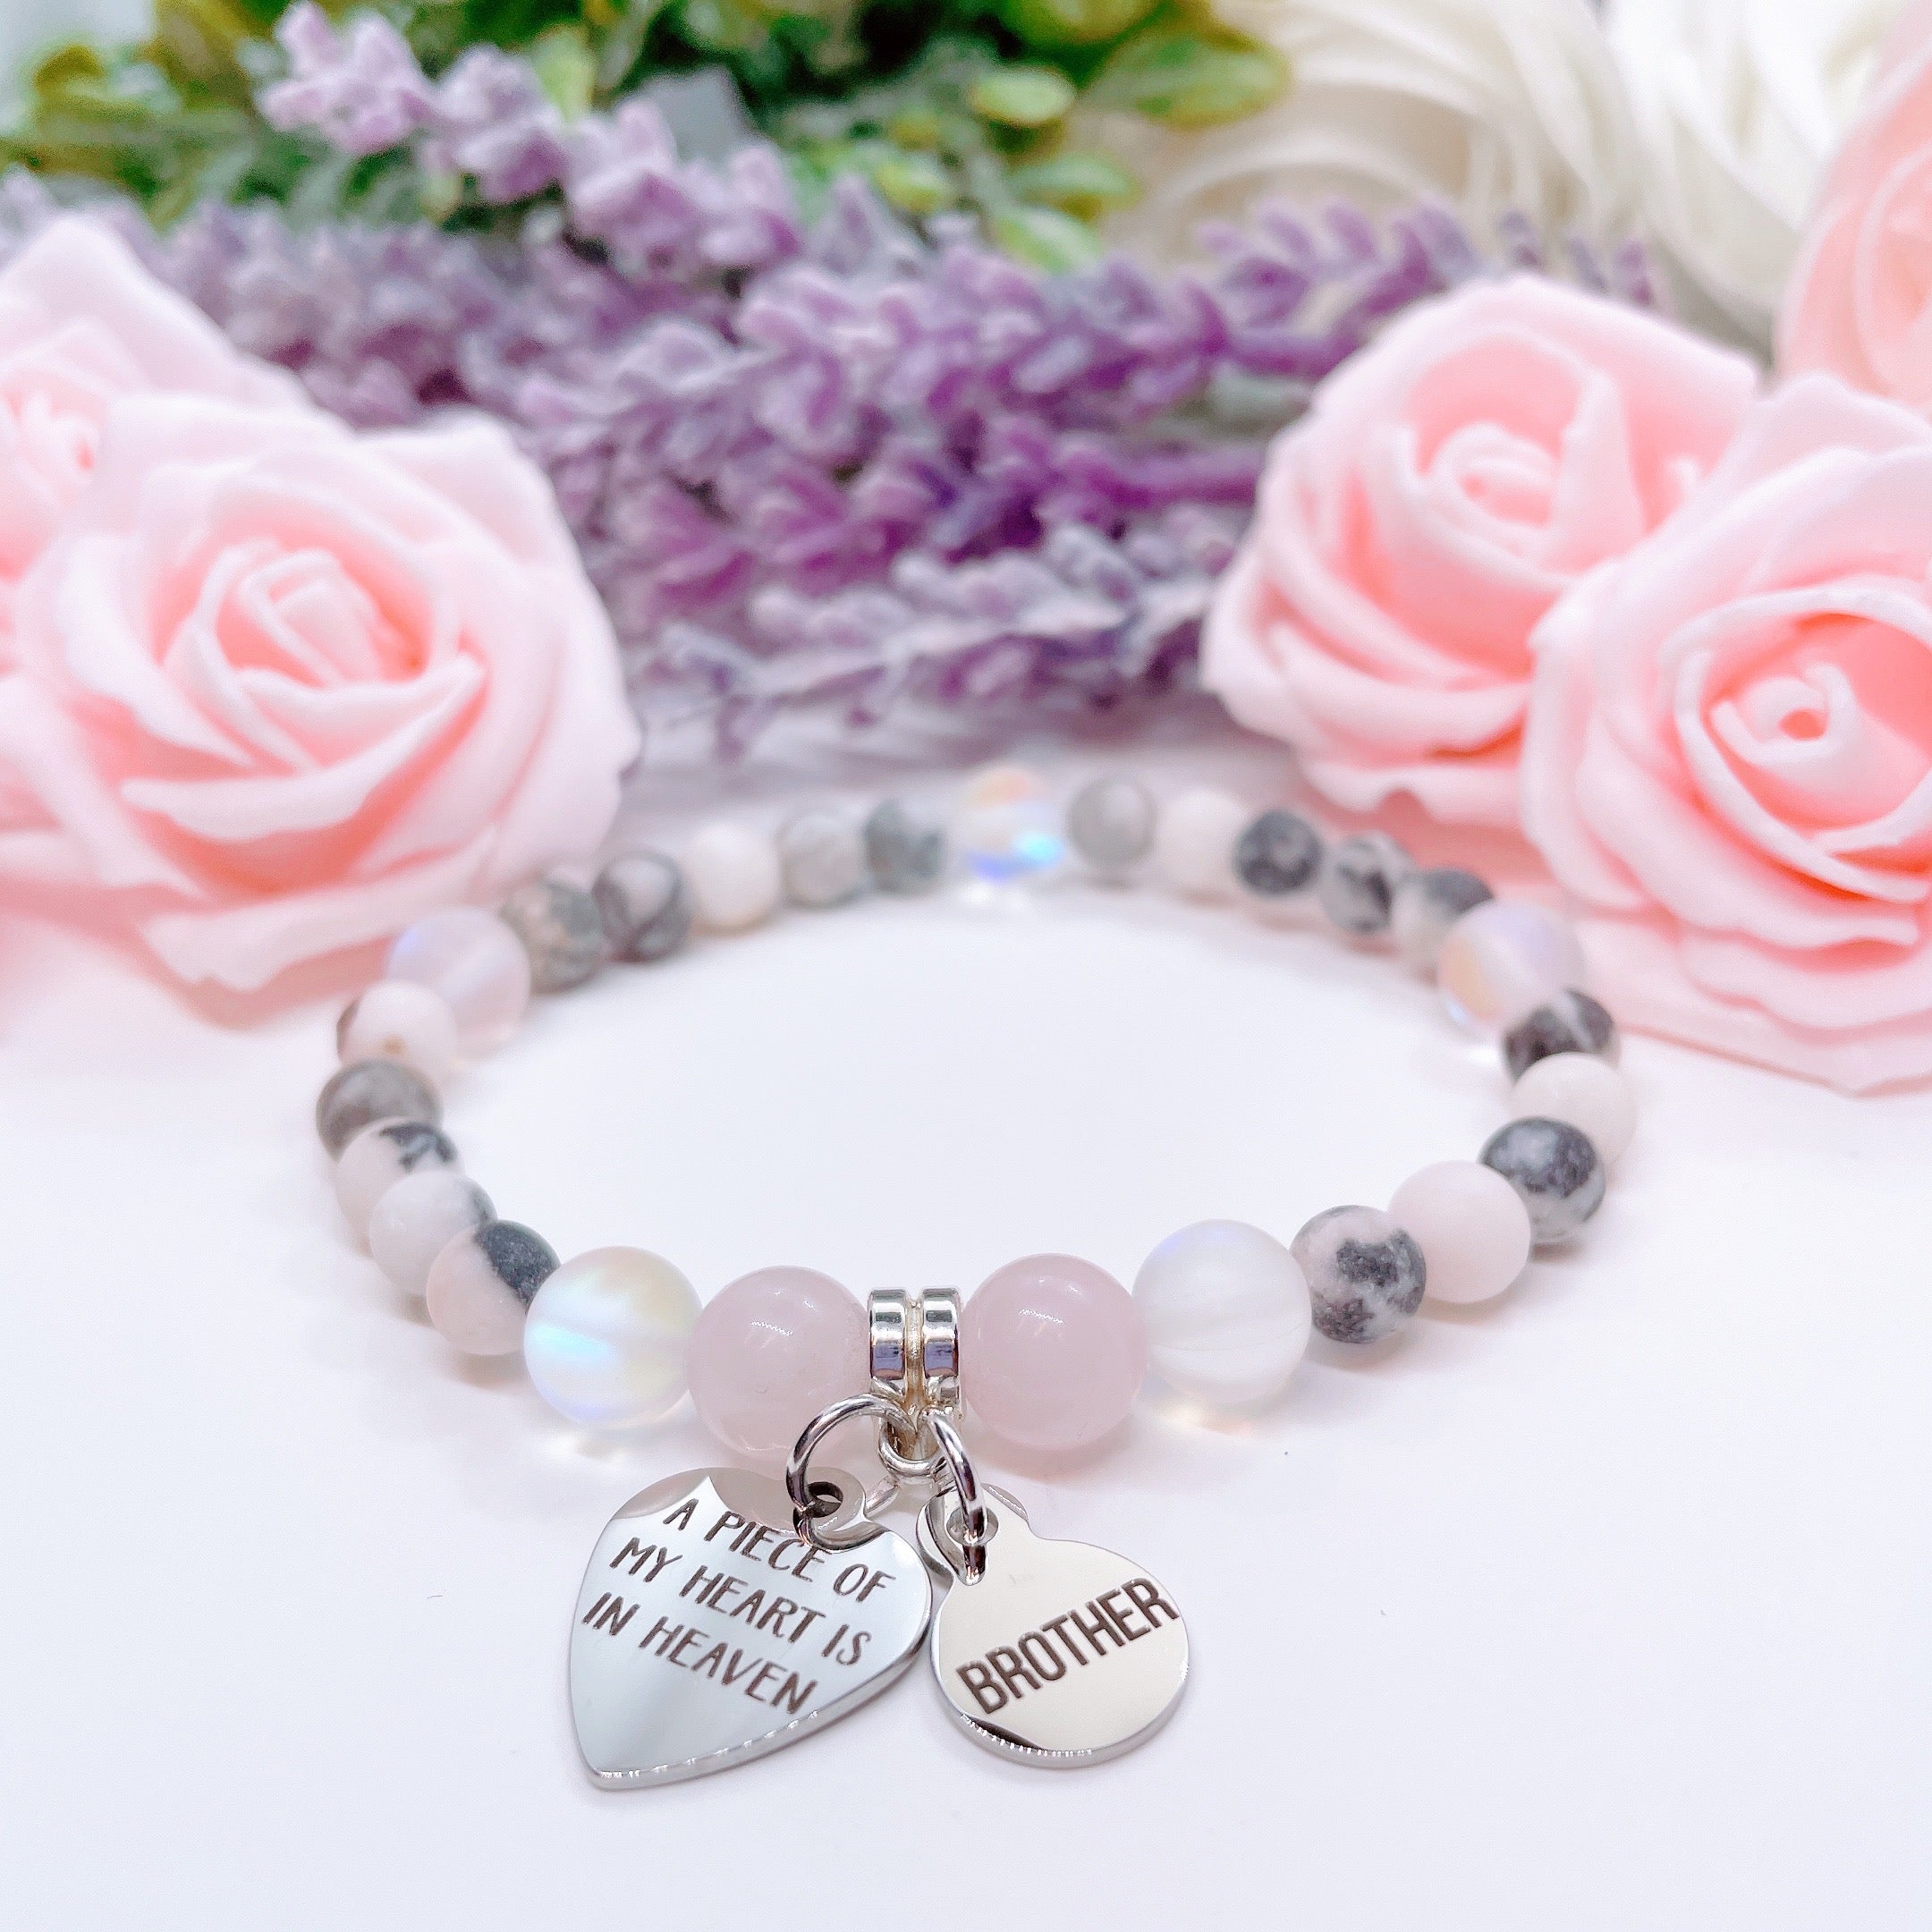 Brother: A Piece of my Heart is in Heaven Heart Companion Charm Bracelet Rose Quartz